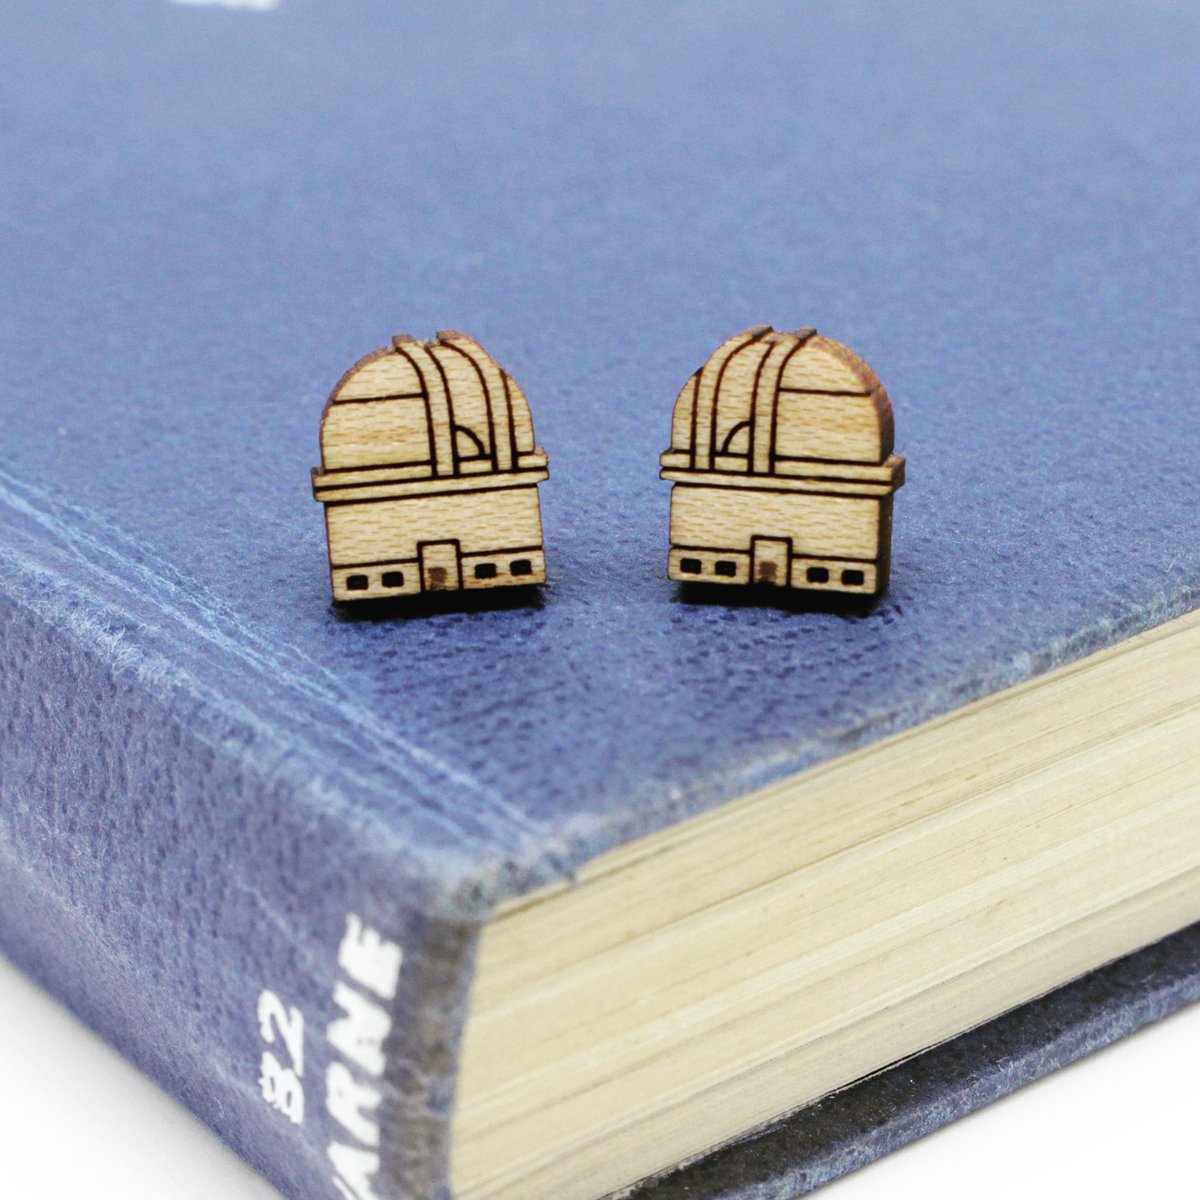 The Observatory design is now available as super cute ear studs! #observatory #palomarobservatory #spacejewellery #spacejewelry #sciencefashion #lasercutjewellery #astronomy #astronomyjewellery #astronomyjewelry